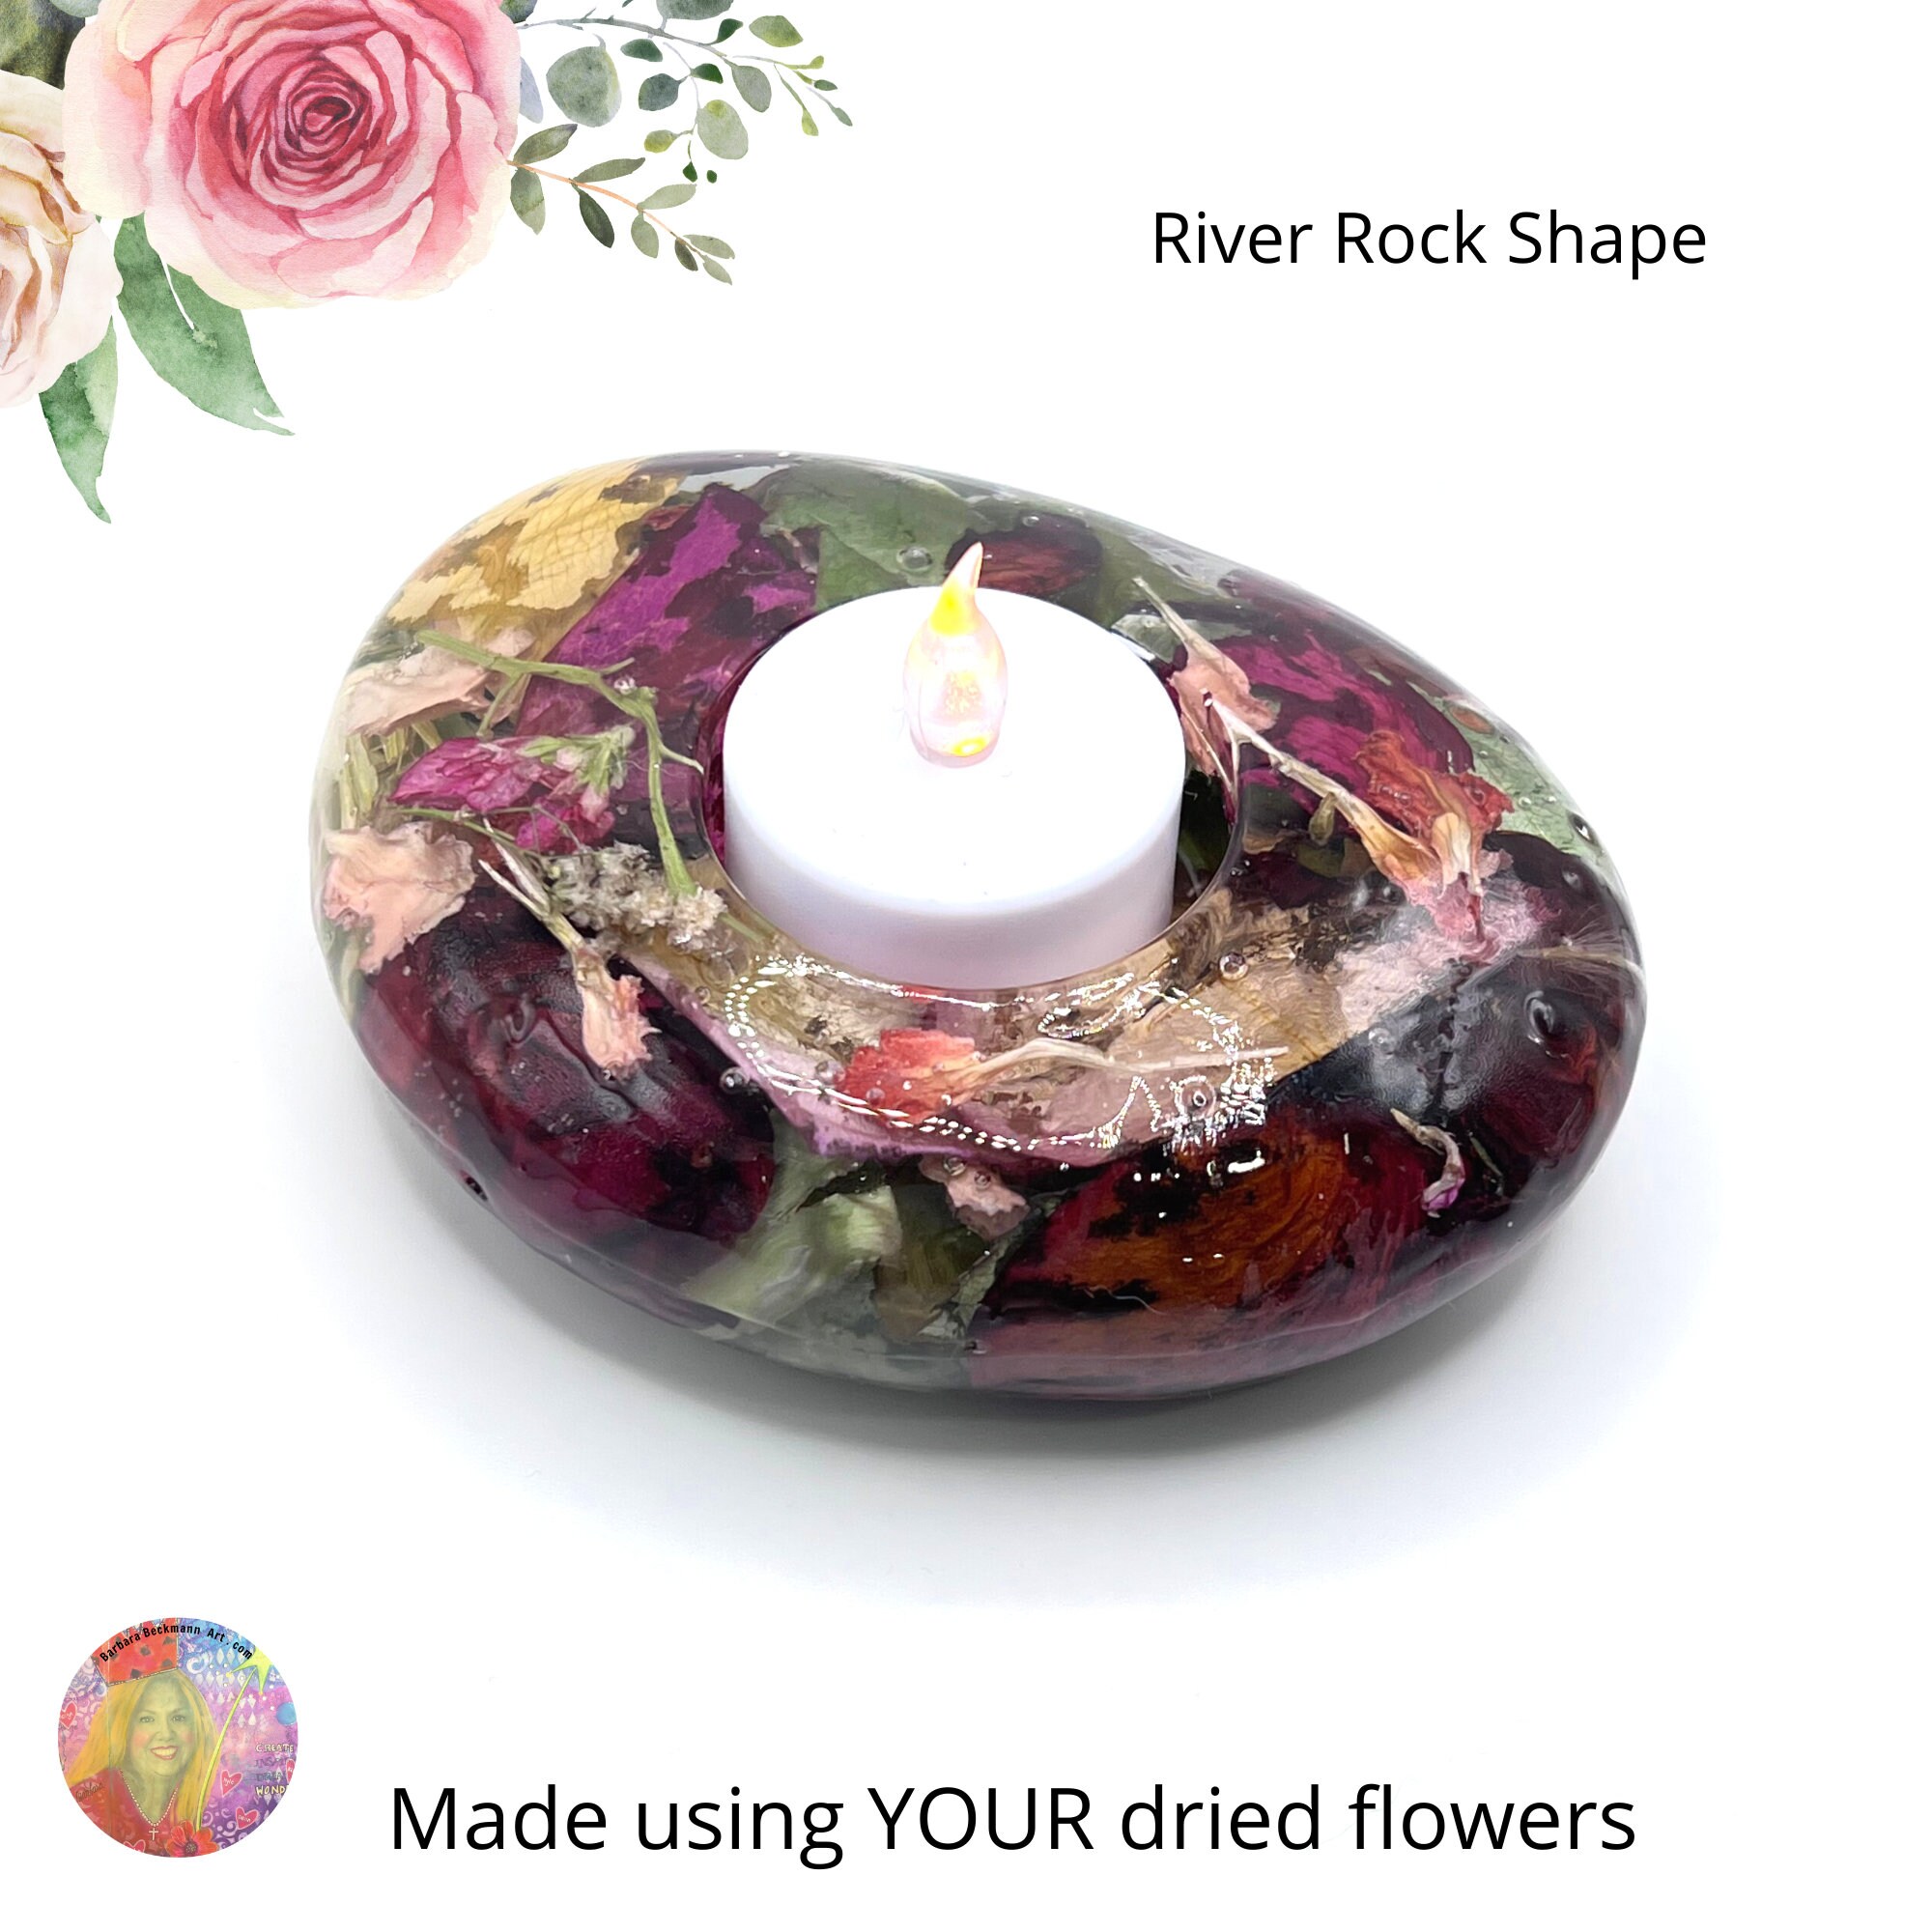 Casting REAL flowers in to RESIN making a tea light candle holder